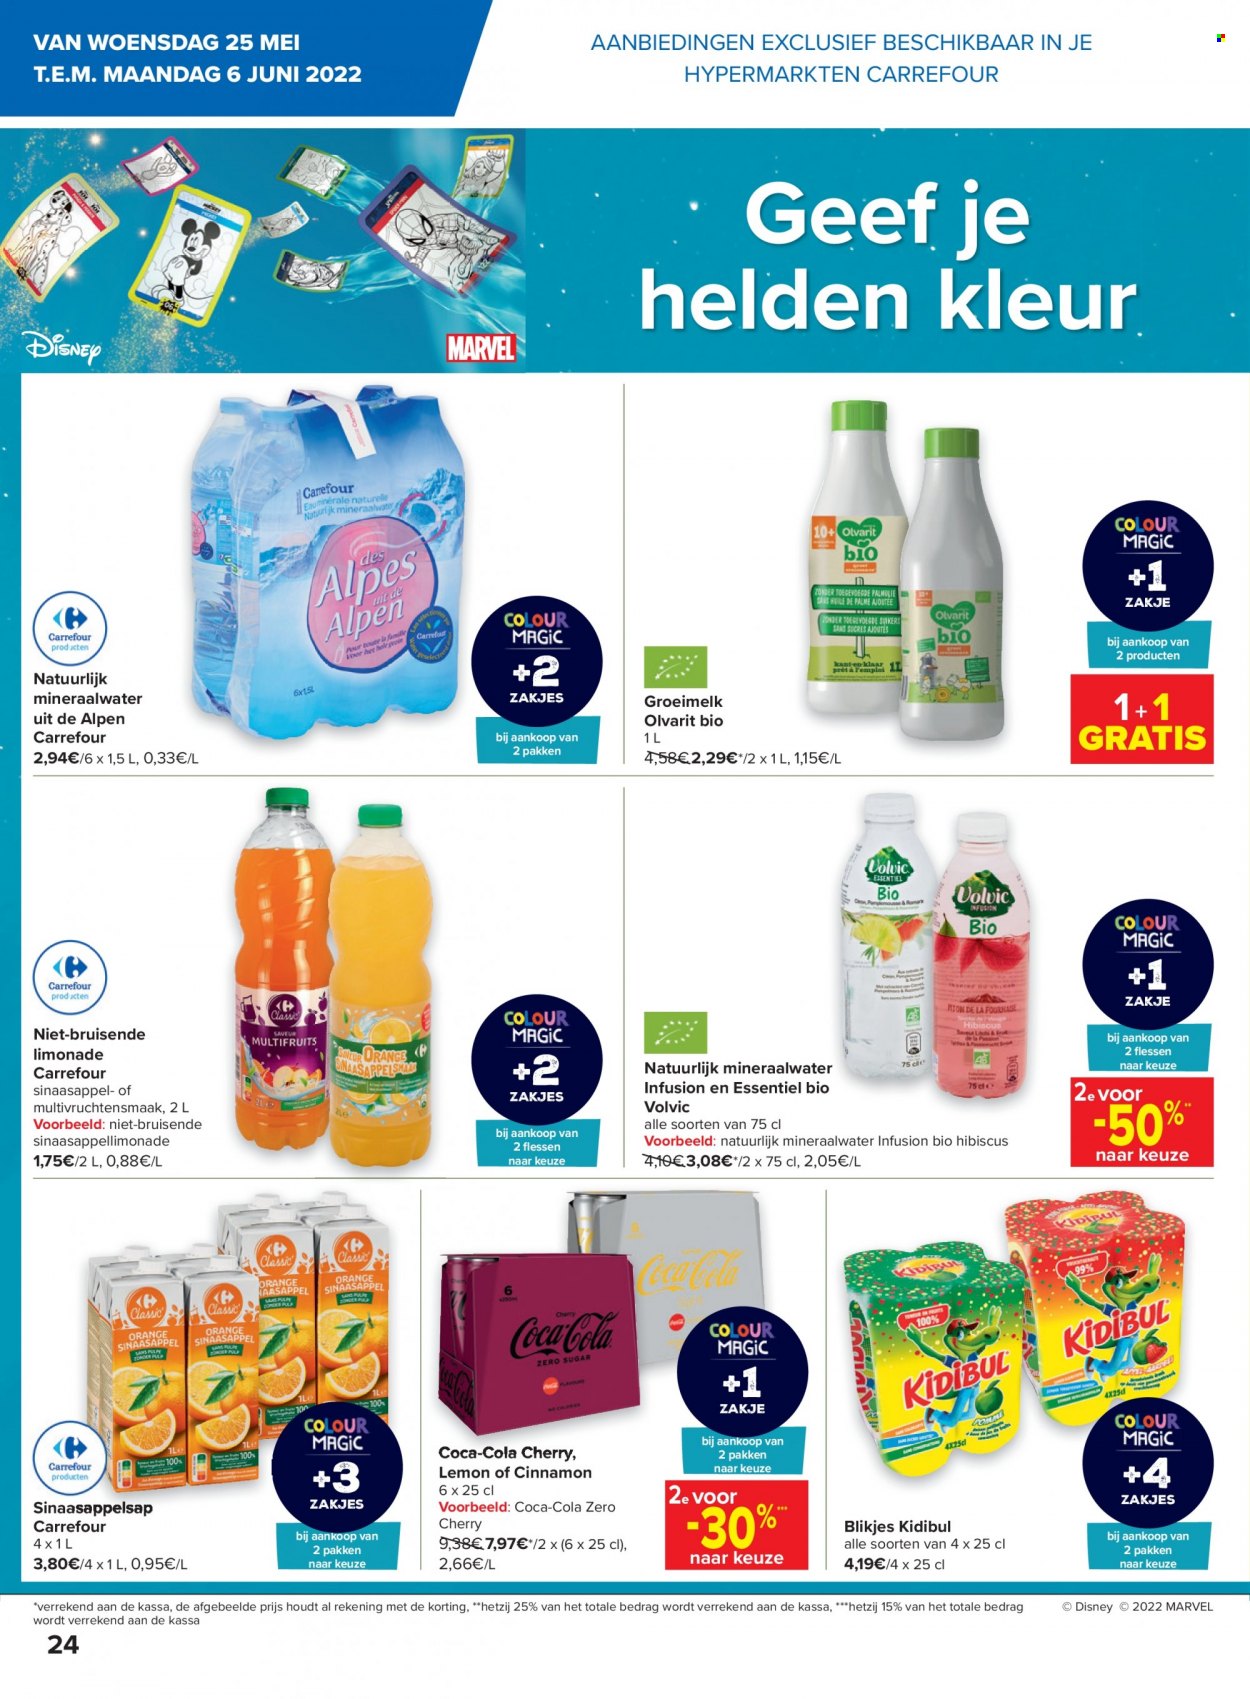 Catalogue Carrefour hypermarkt - 24.5.2022 - 30.5.2022. Page 24.